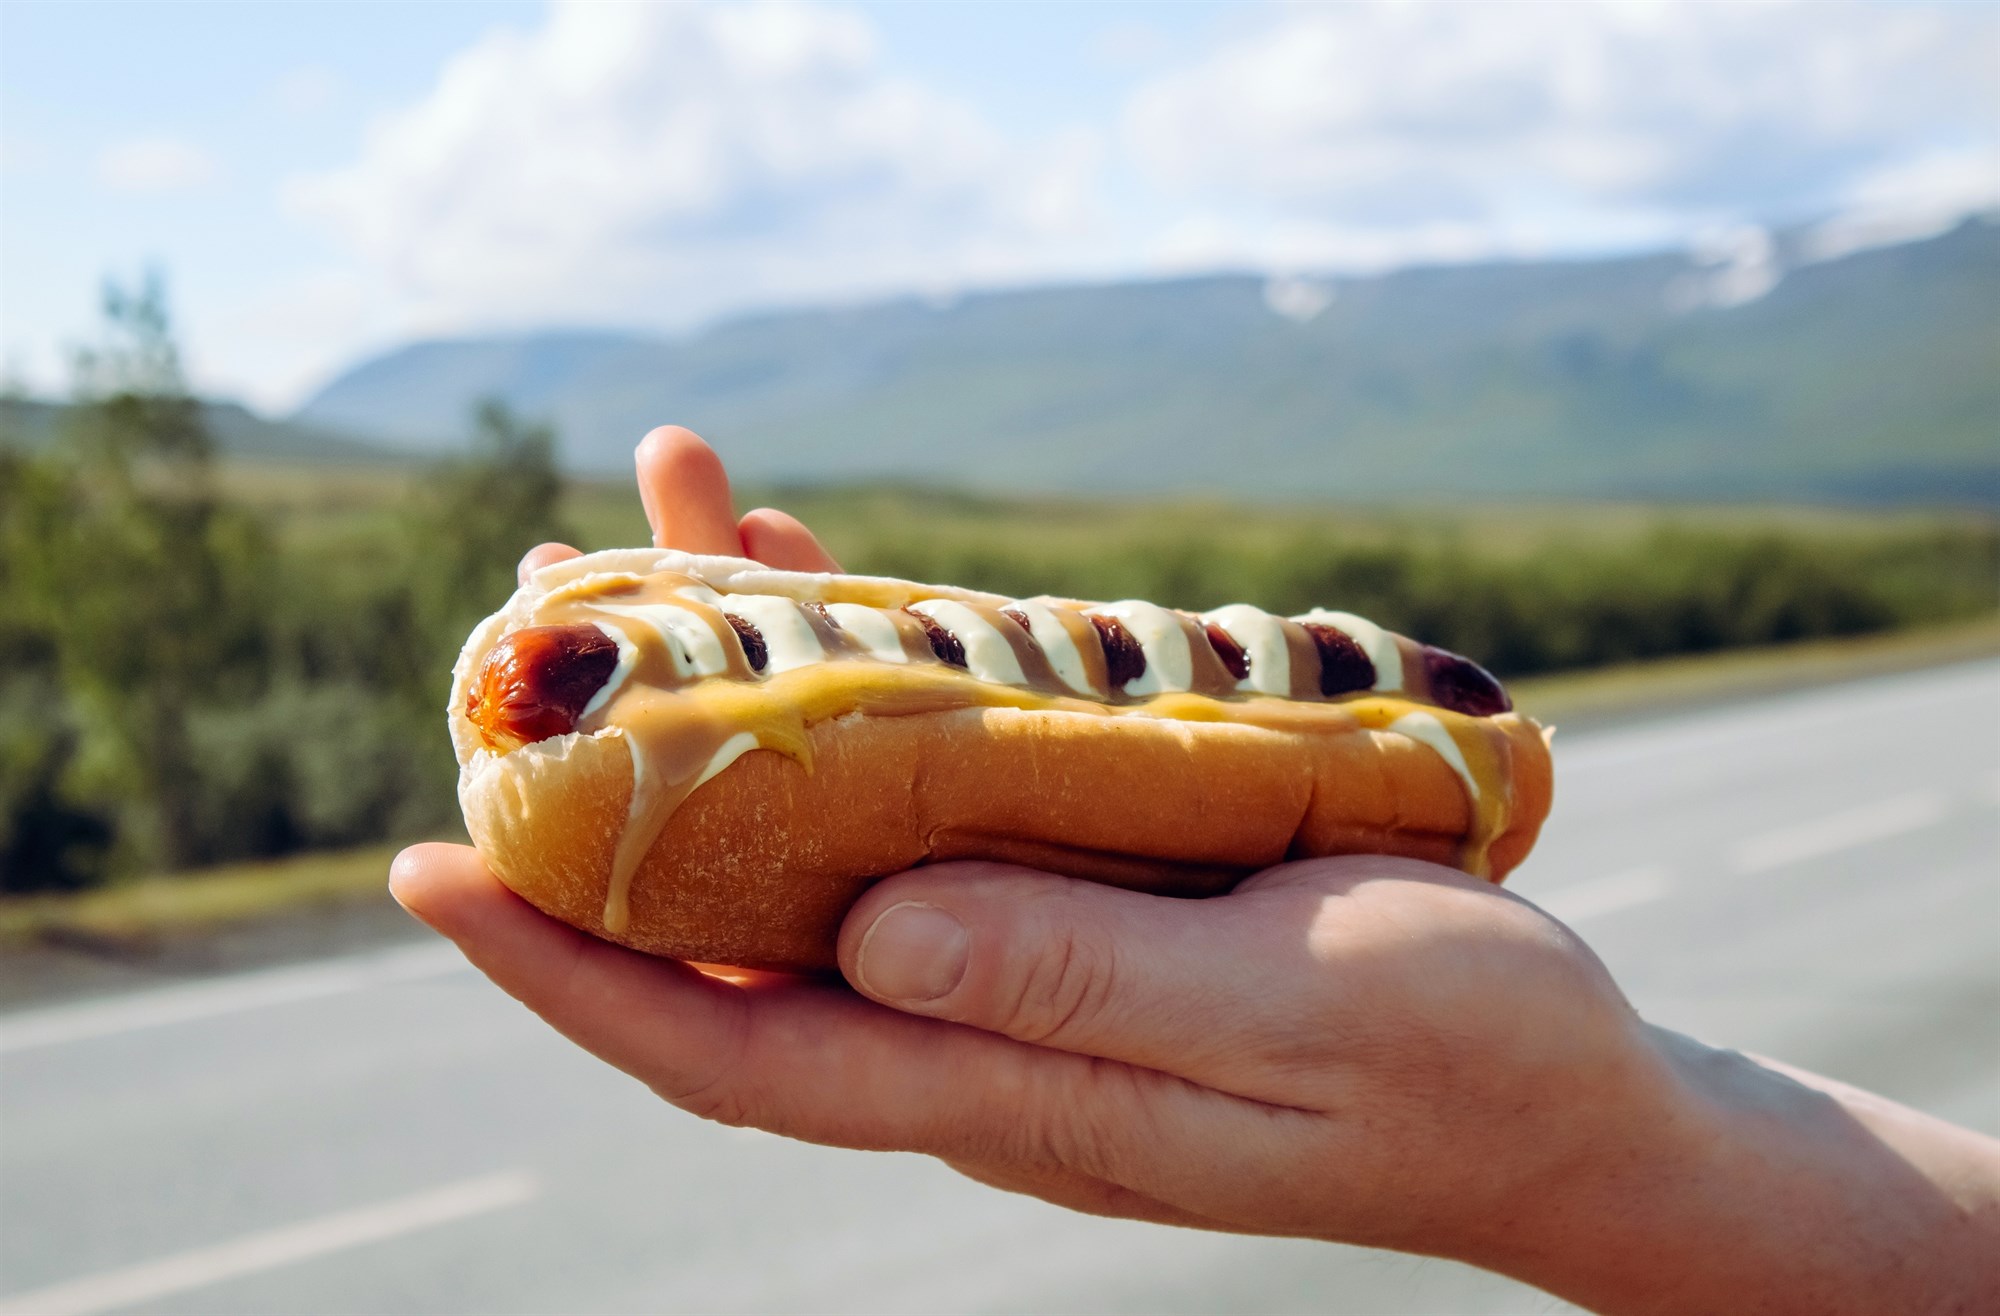 Icelandic lamb hot dog is the most popular fast food in Iceland.